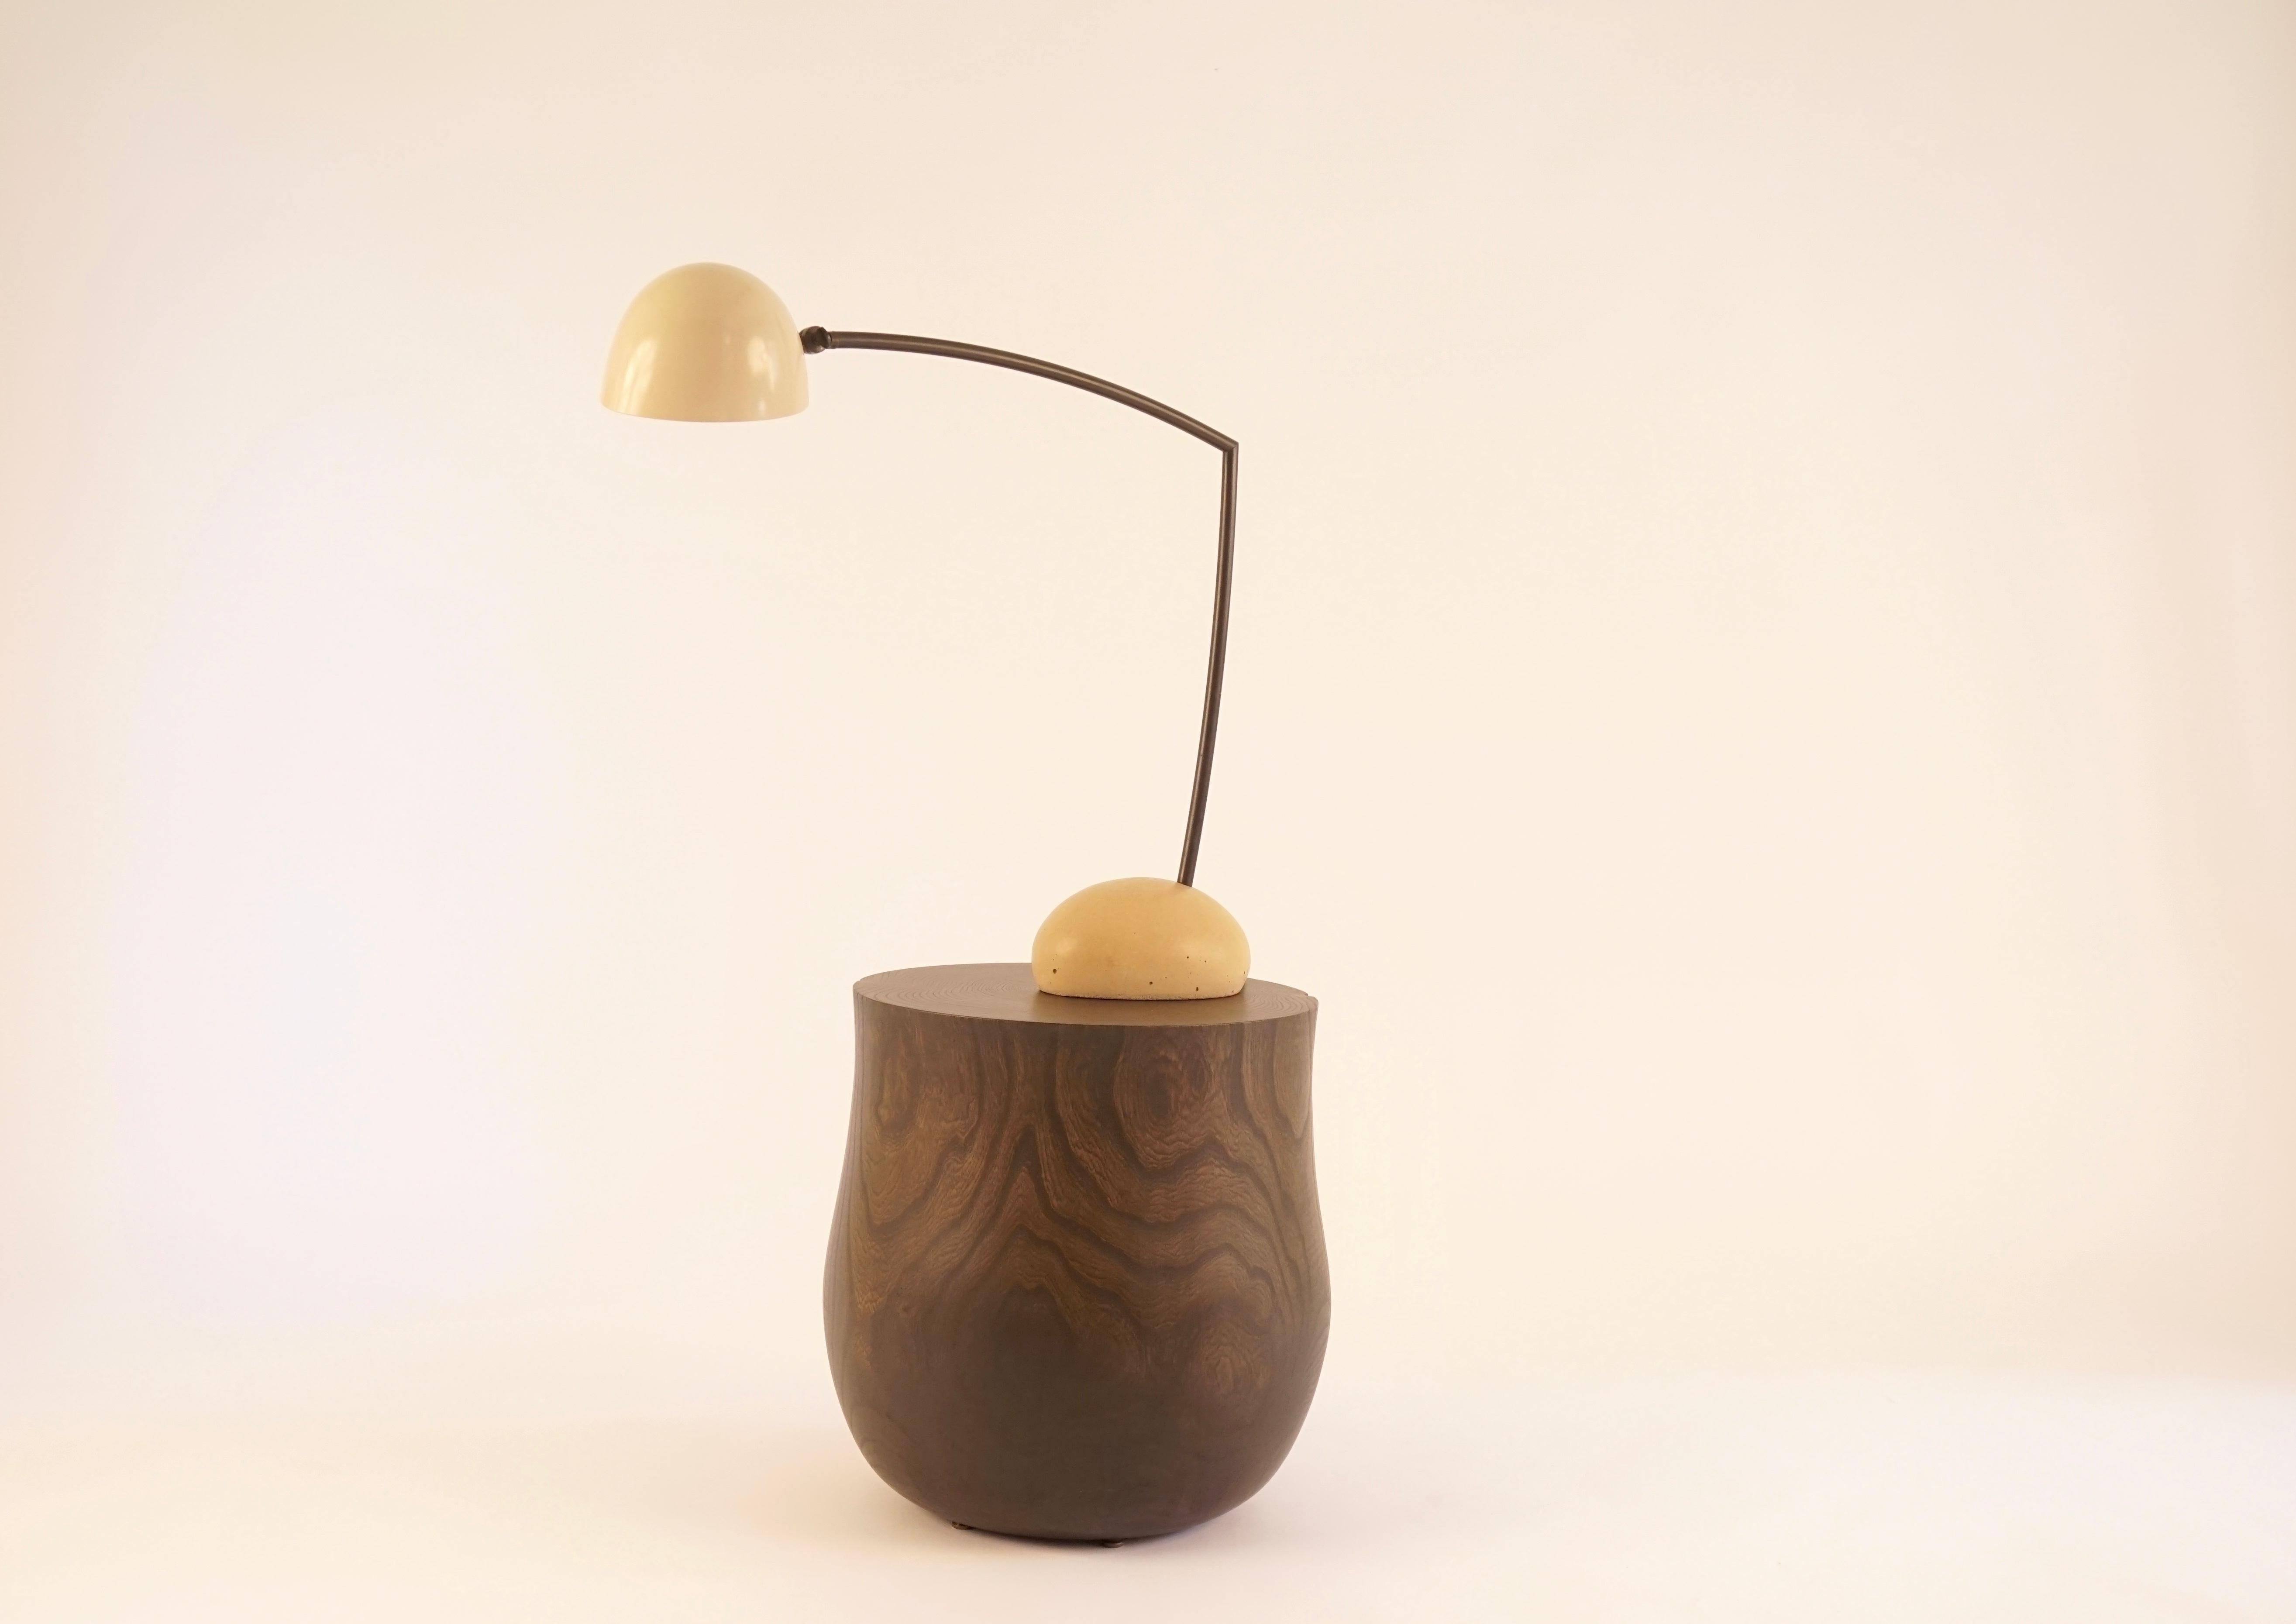 Cast Skye Table Lamp Medium, with Spun Aluminum Shade and Stone Shaped Cement Base 